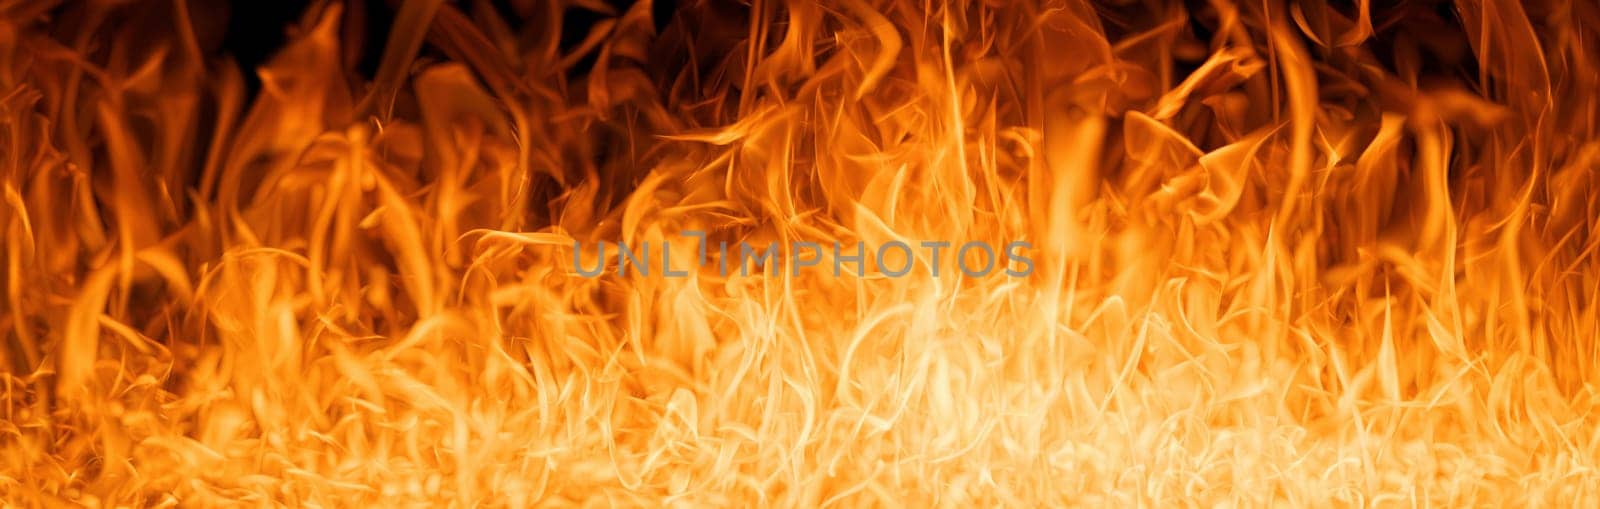 Hell flames, devil's mouth. fire banner. A background of scalding flames. Firestorm. Fire burning. Bright burning flames on a black background. Wall of Real fire, abstract background. Fire flames by EvgeniyQW